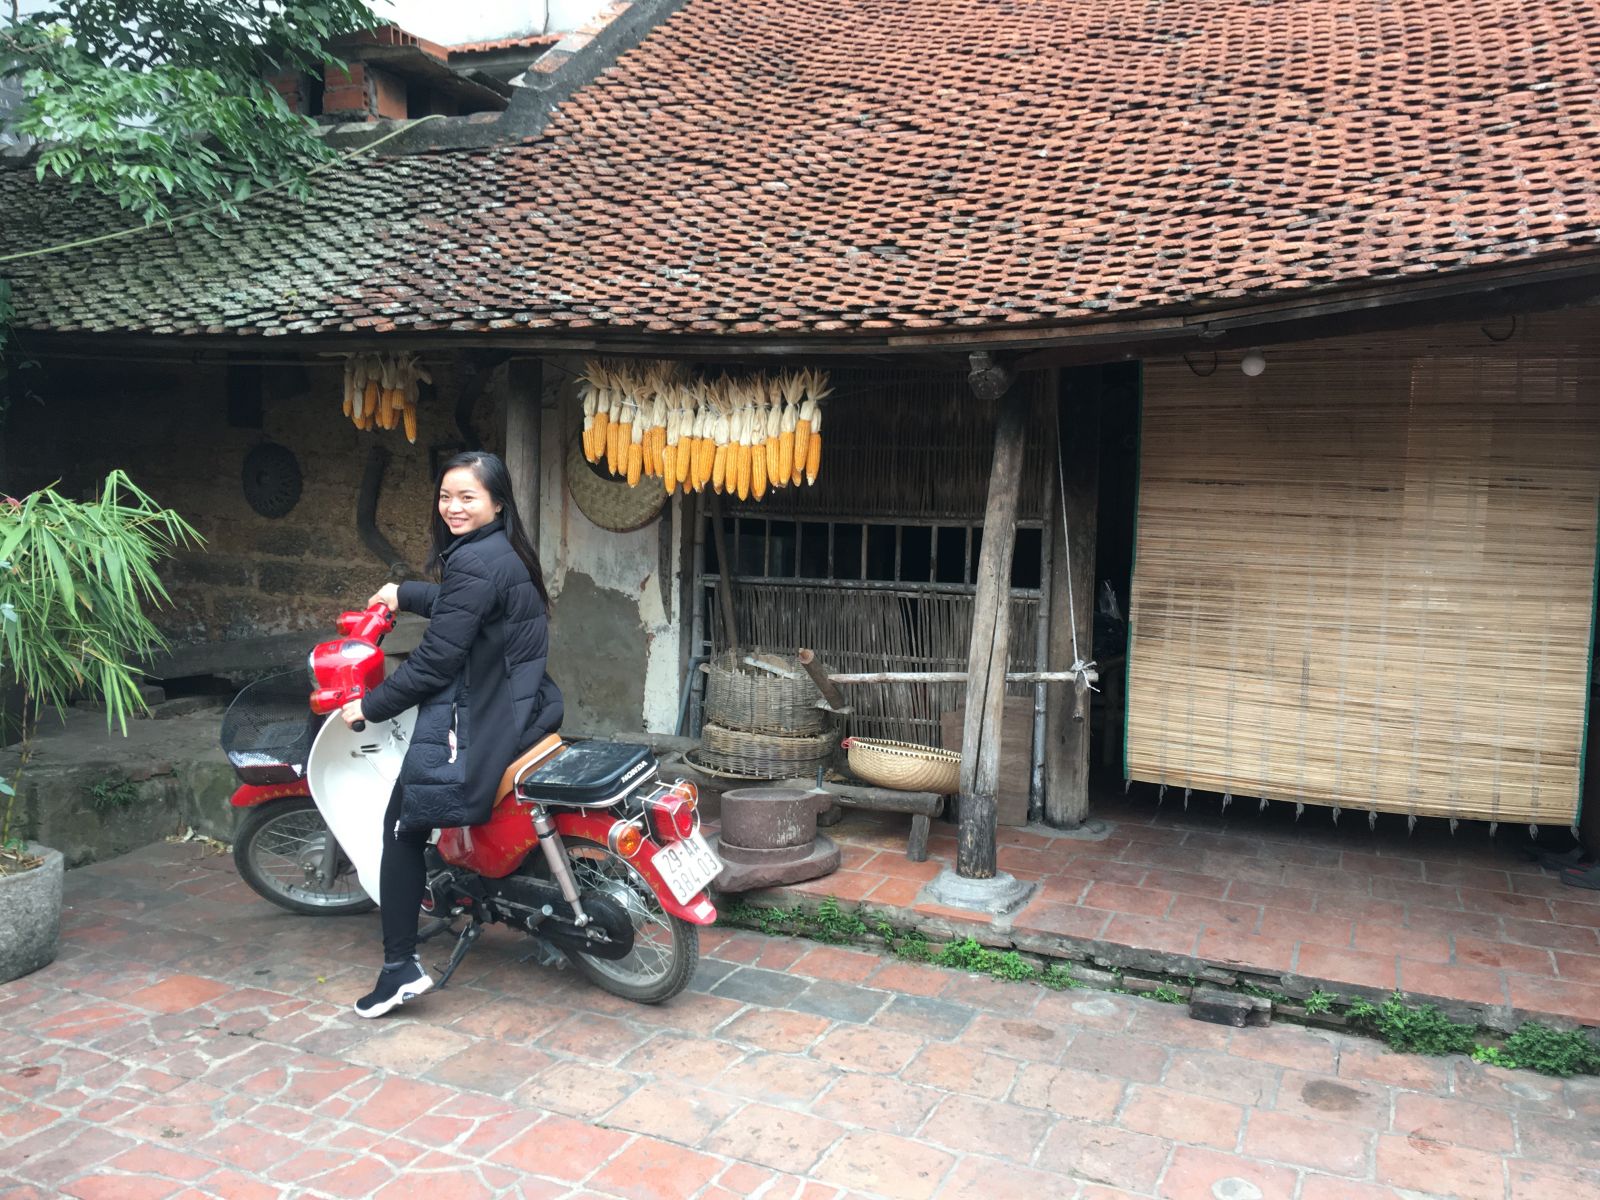 Duong lam village - old kitchen with corn hanging